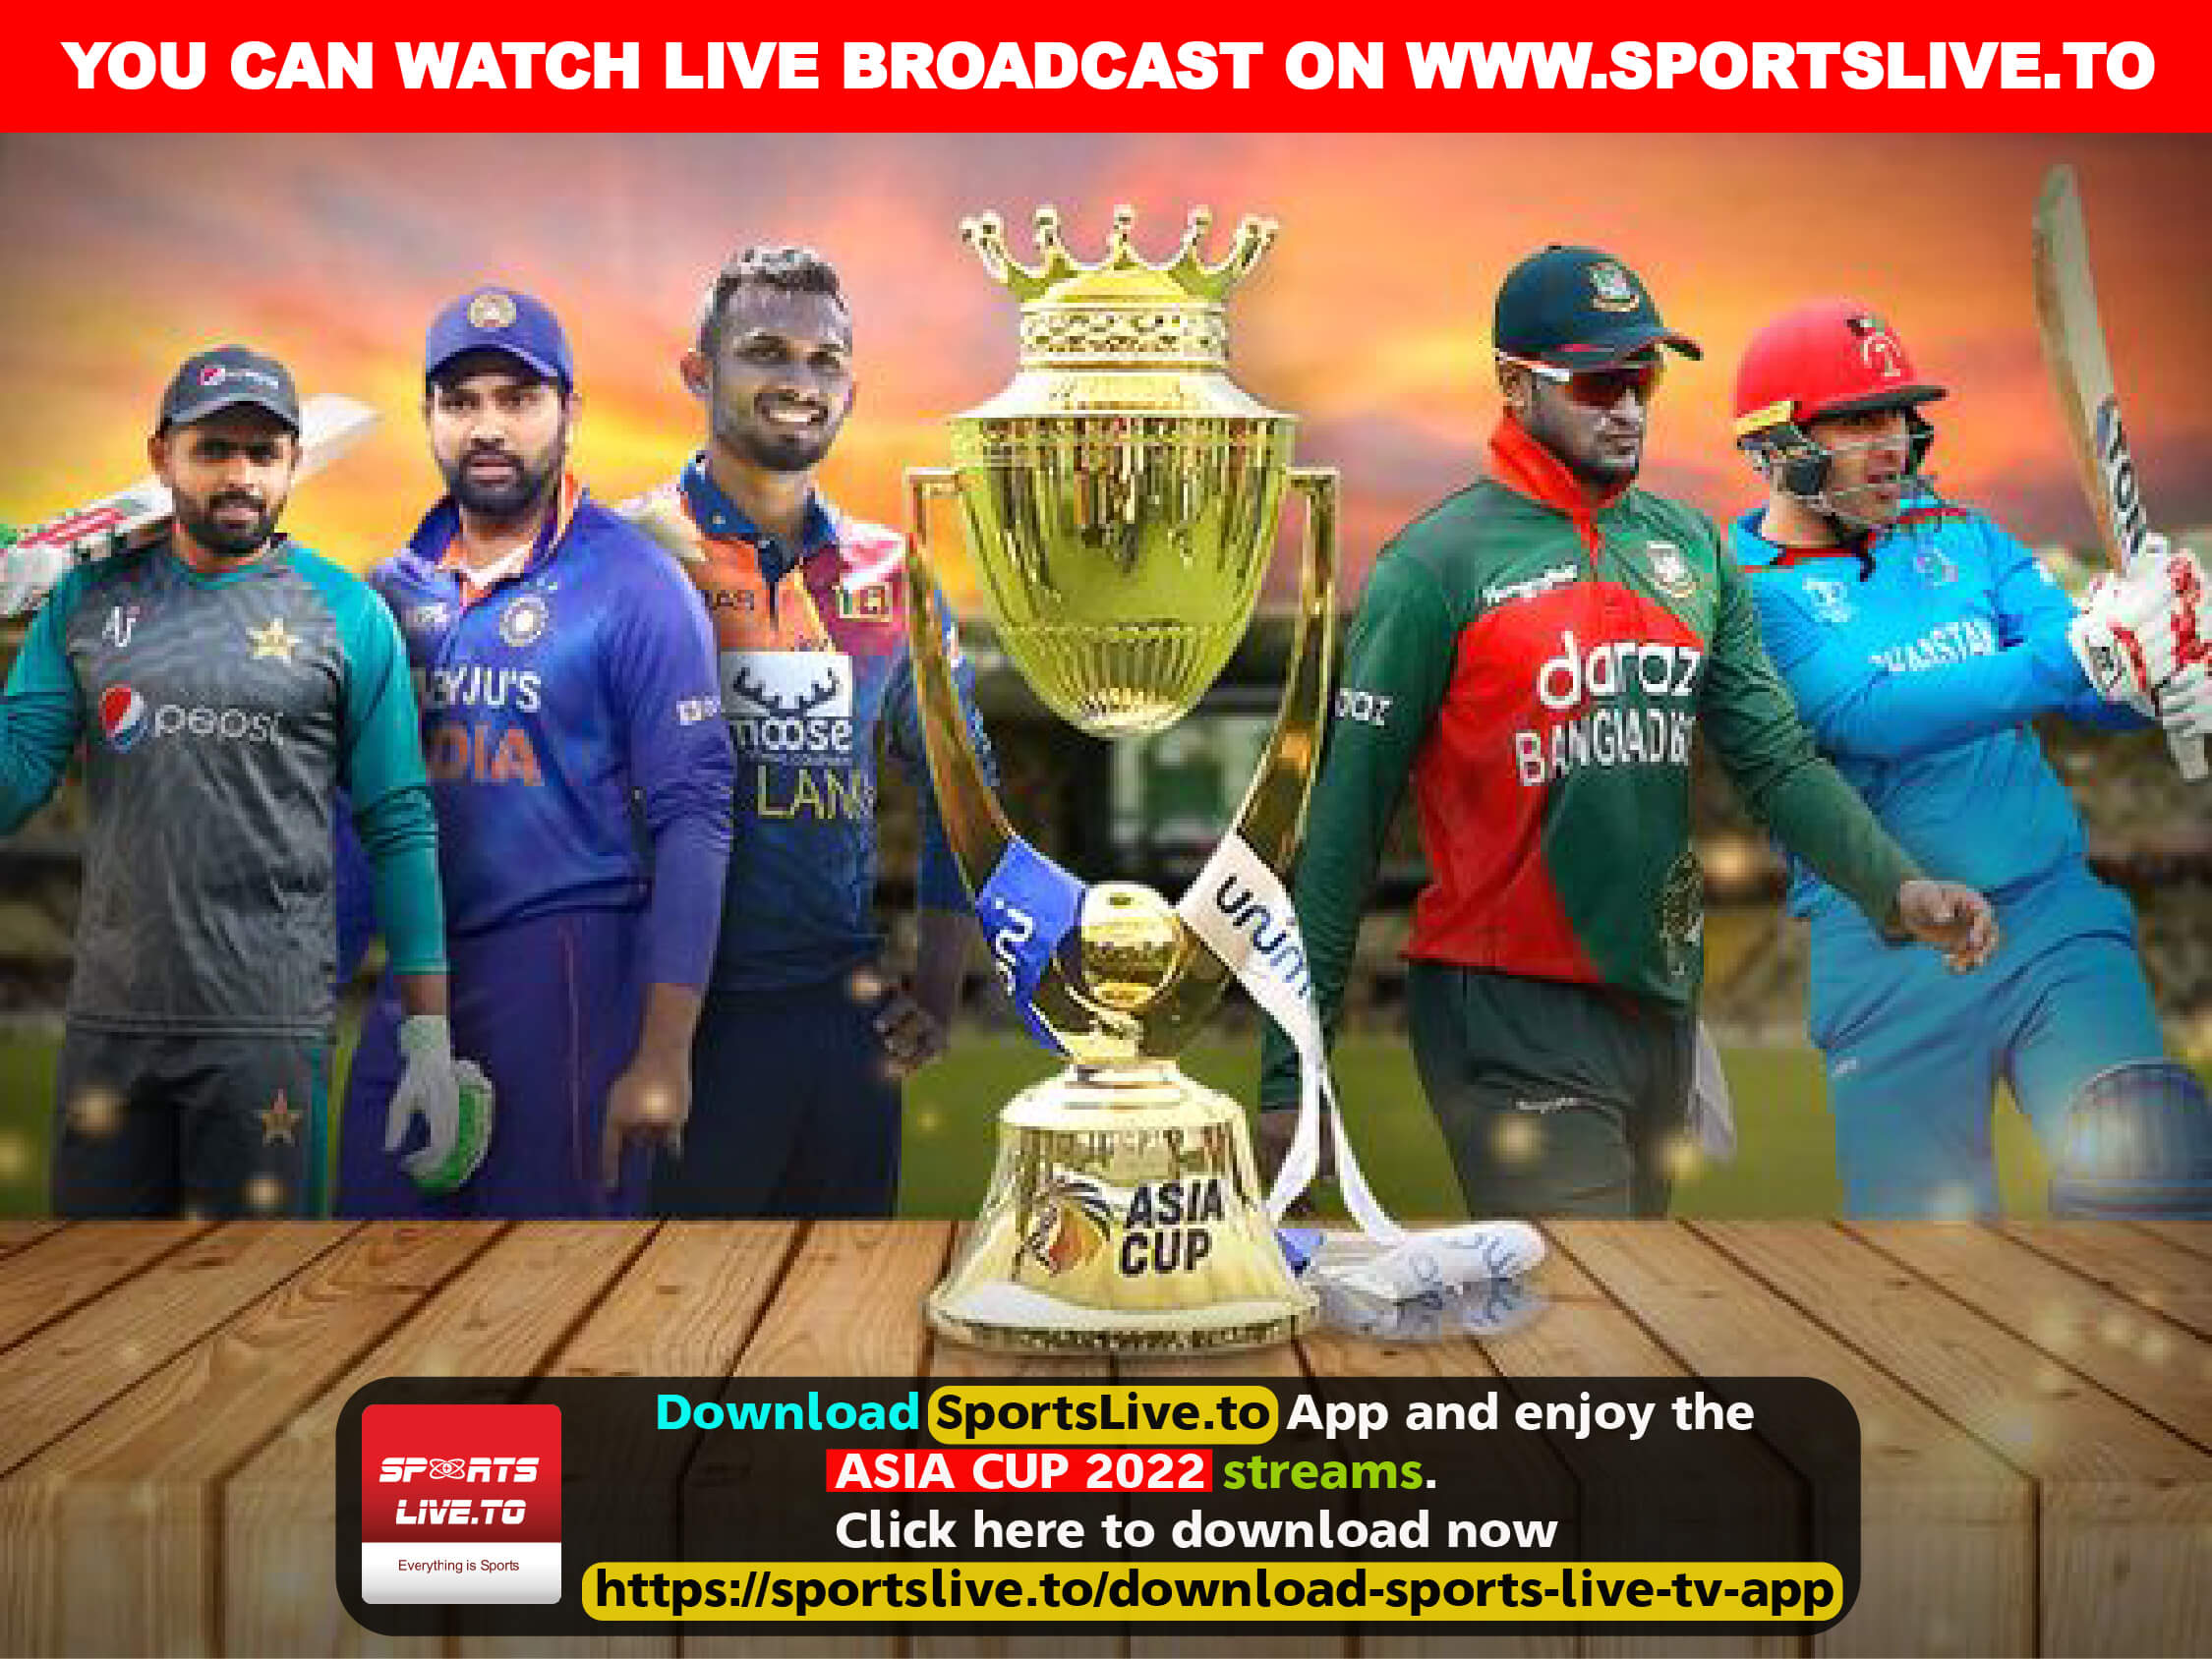 Asia Cup 2022 by sportslive.to